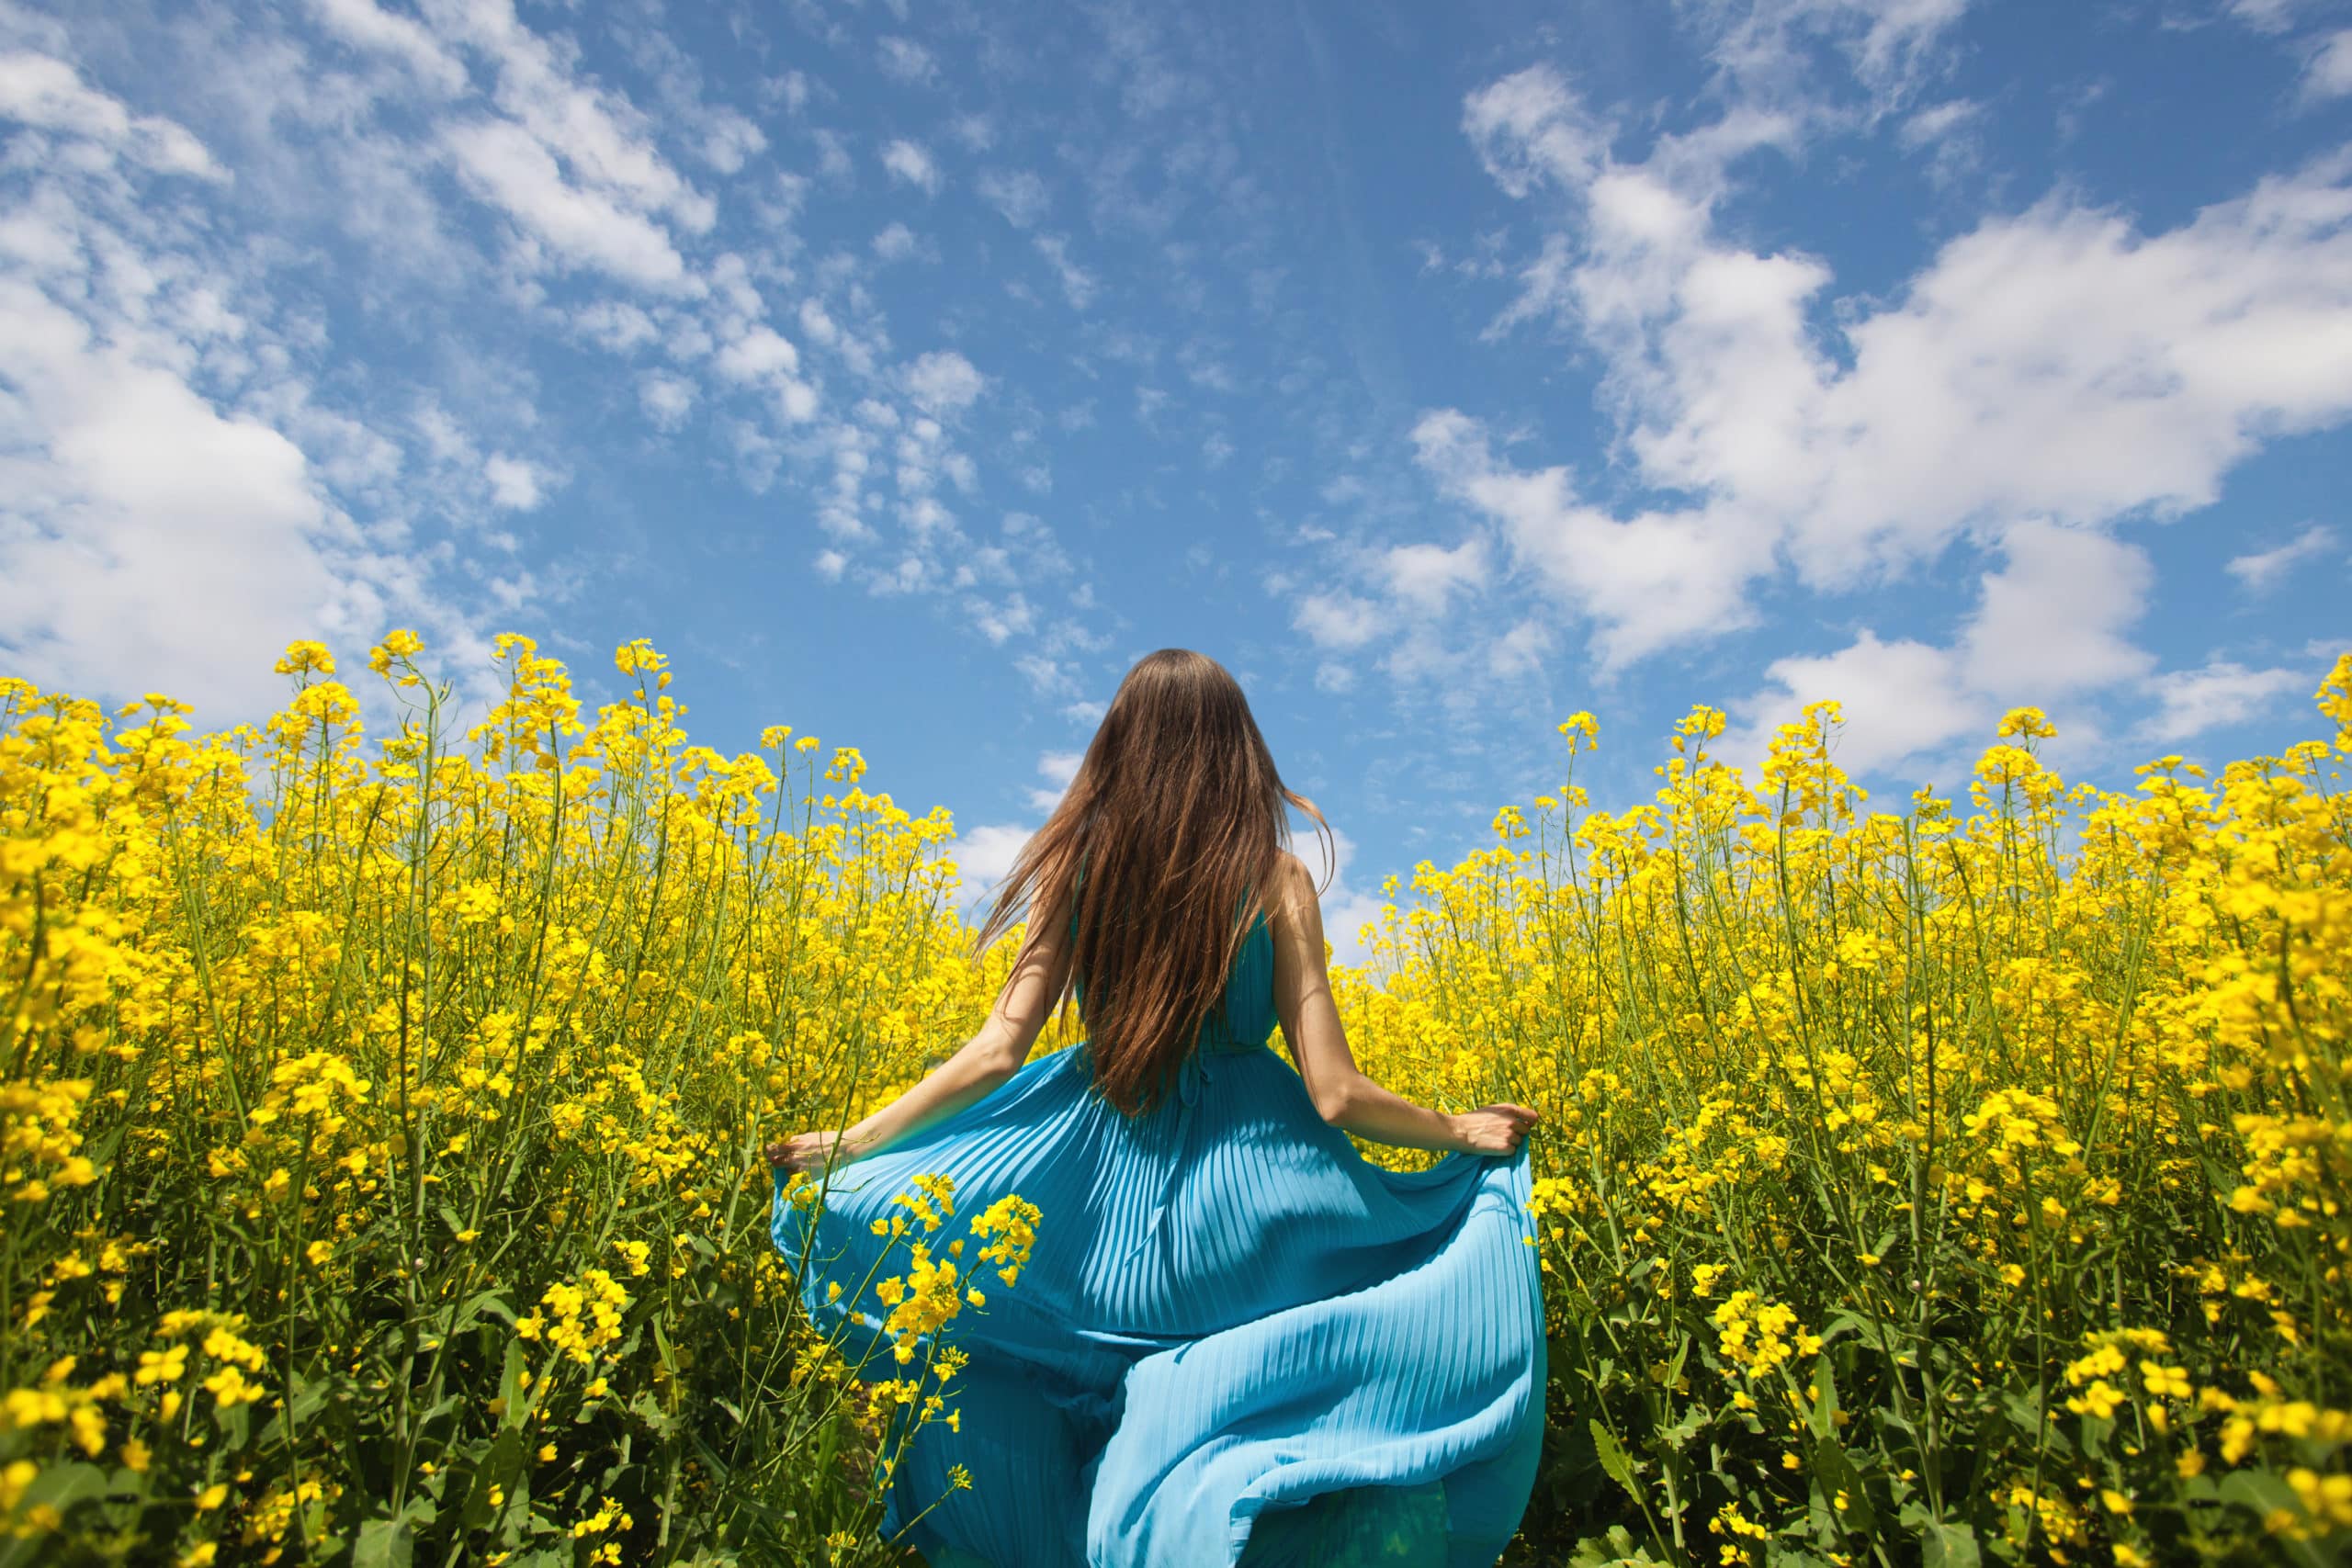 A young girl runs in a puffy blue dress in the field of yellow flowers under the blue sky.